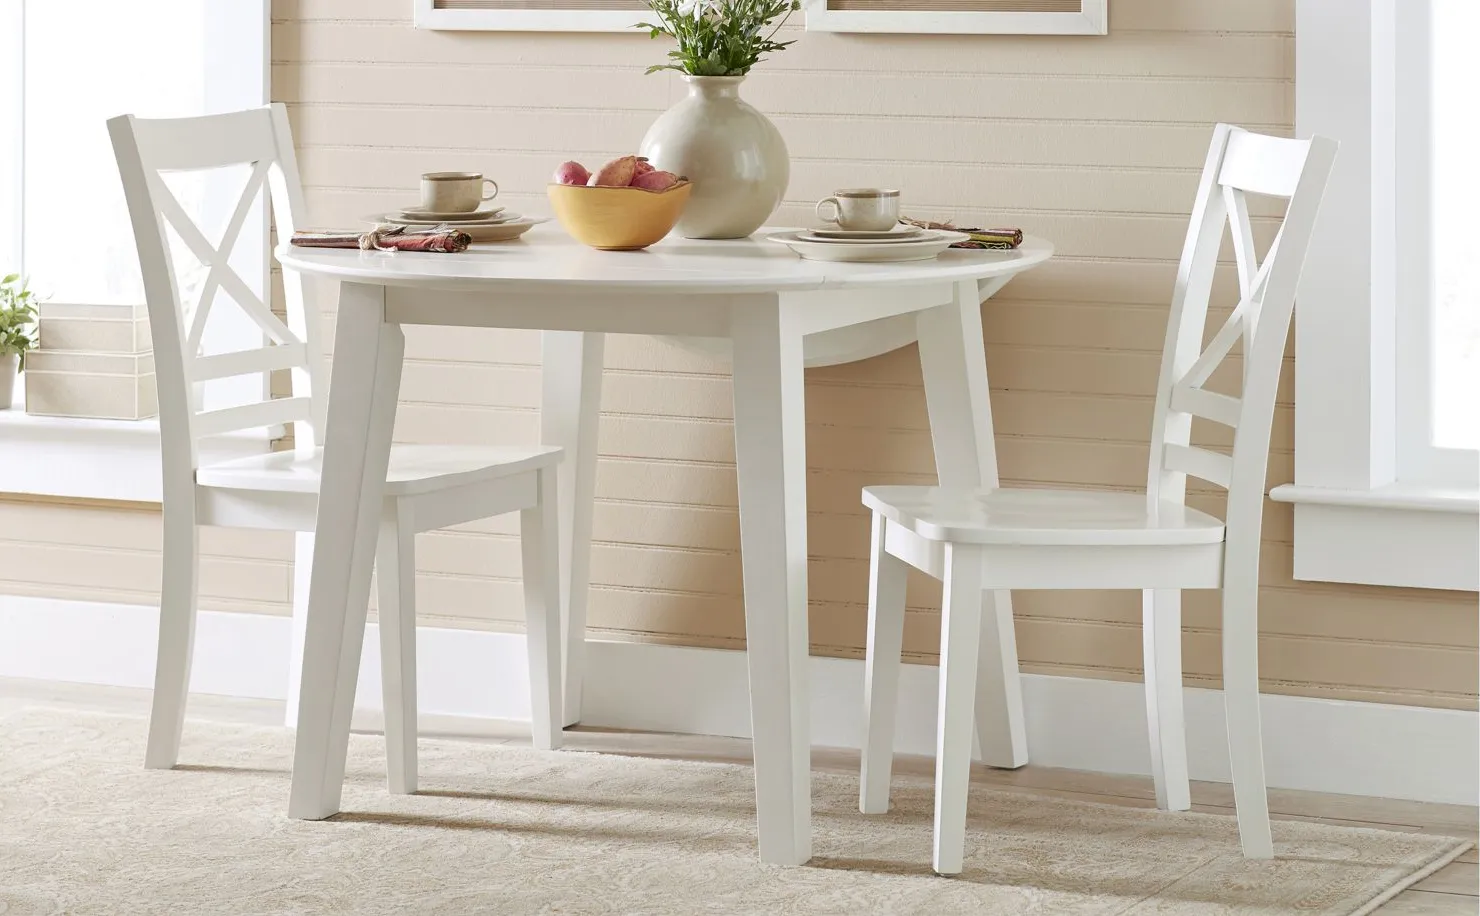 Simplicity 3-pc. Dining Set in Paperwhite by Jofran